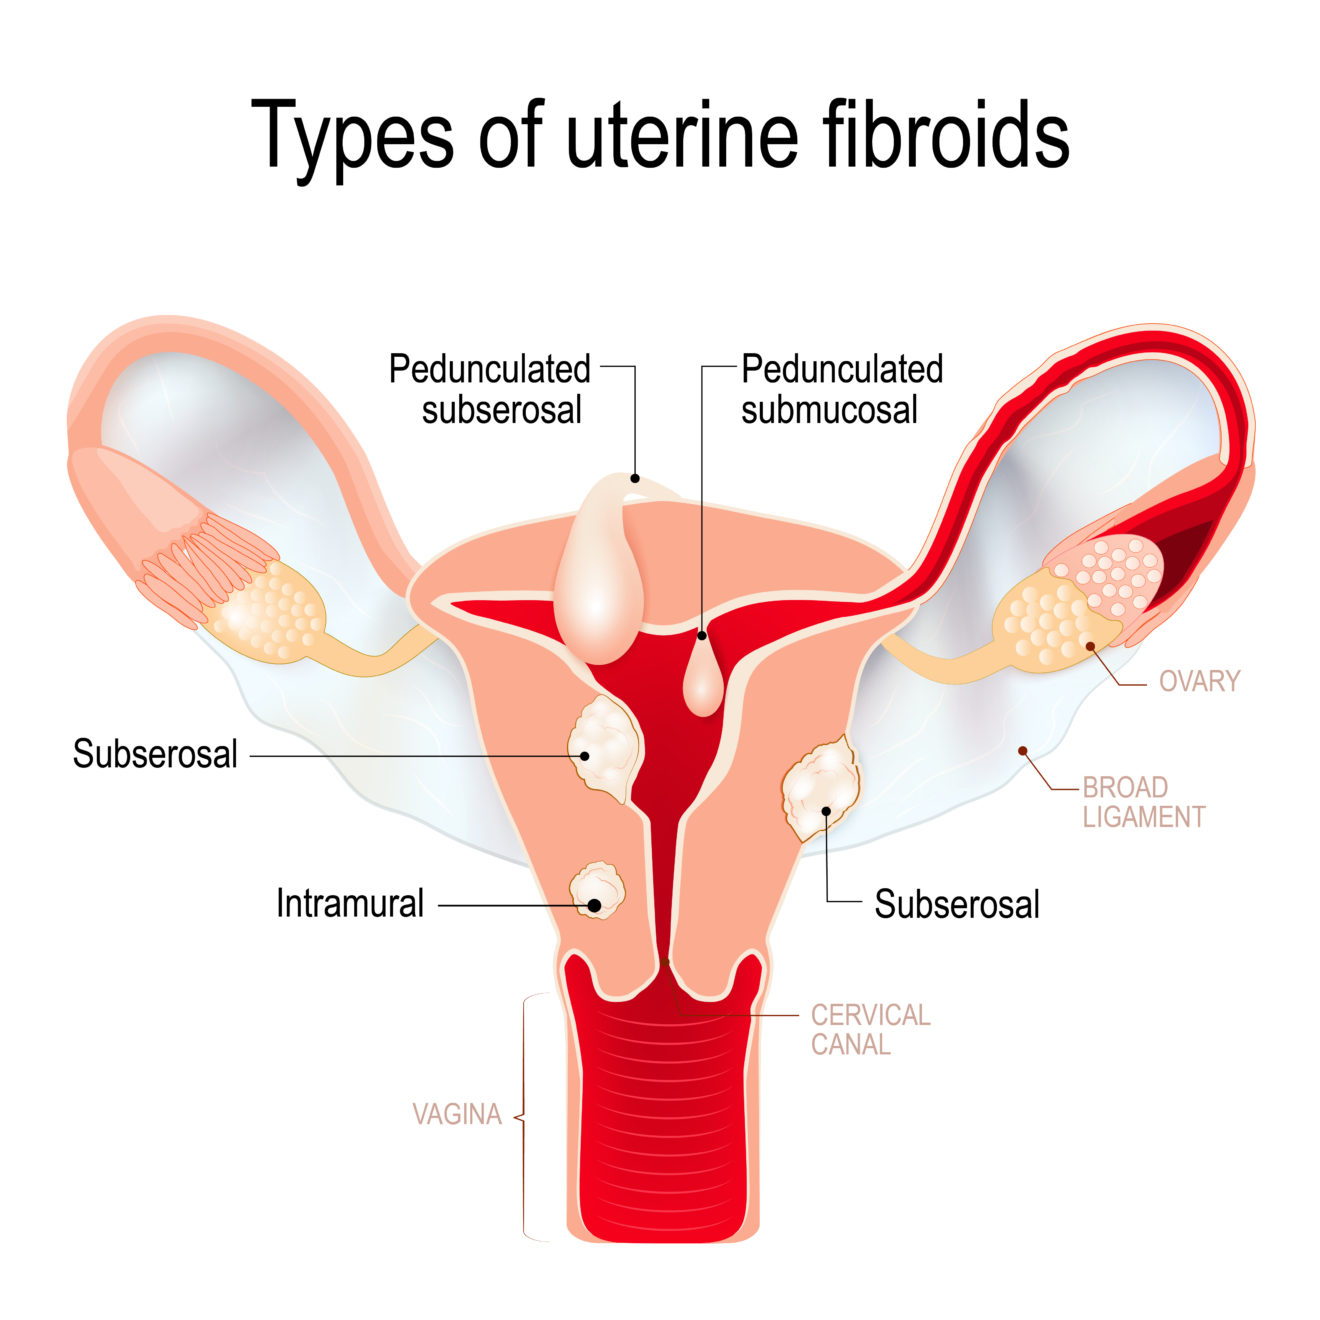 What Are The Symptoms Of Intramural Fibroids